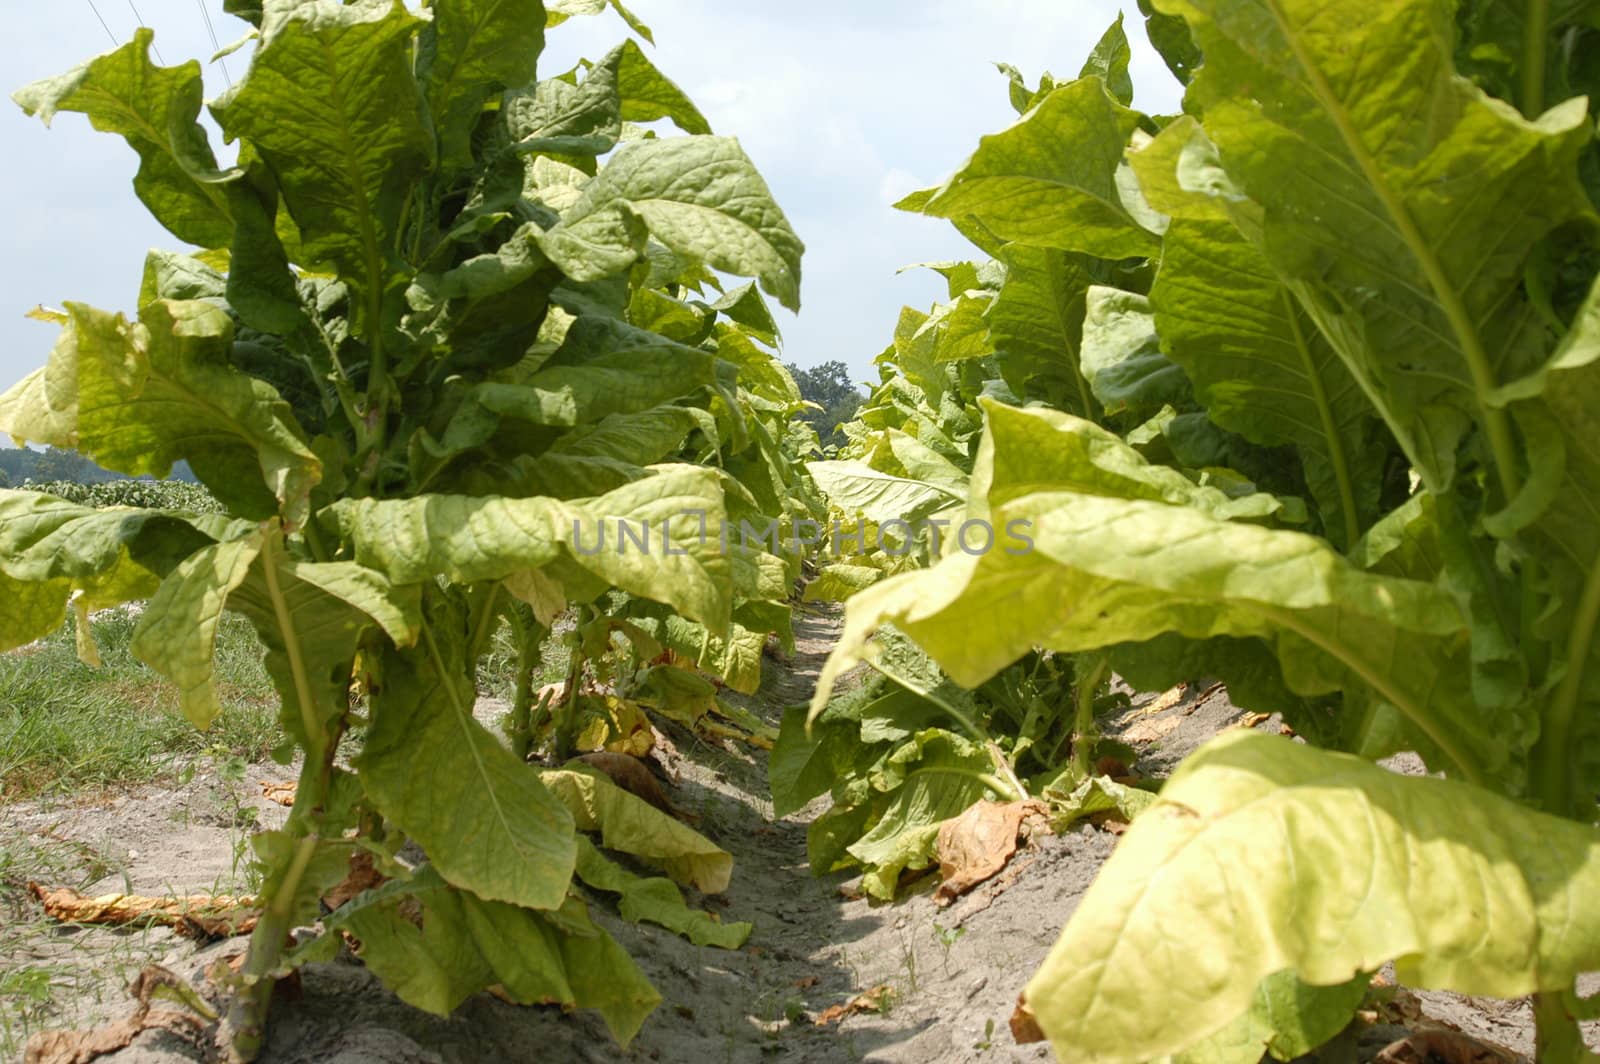 Tobacco in the field by northwoodsphoto